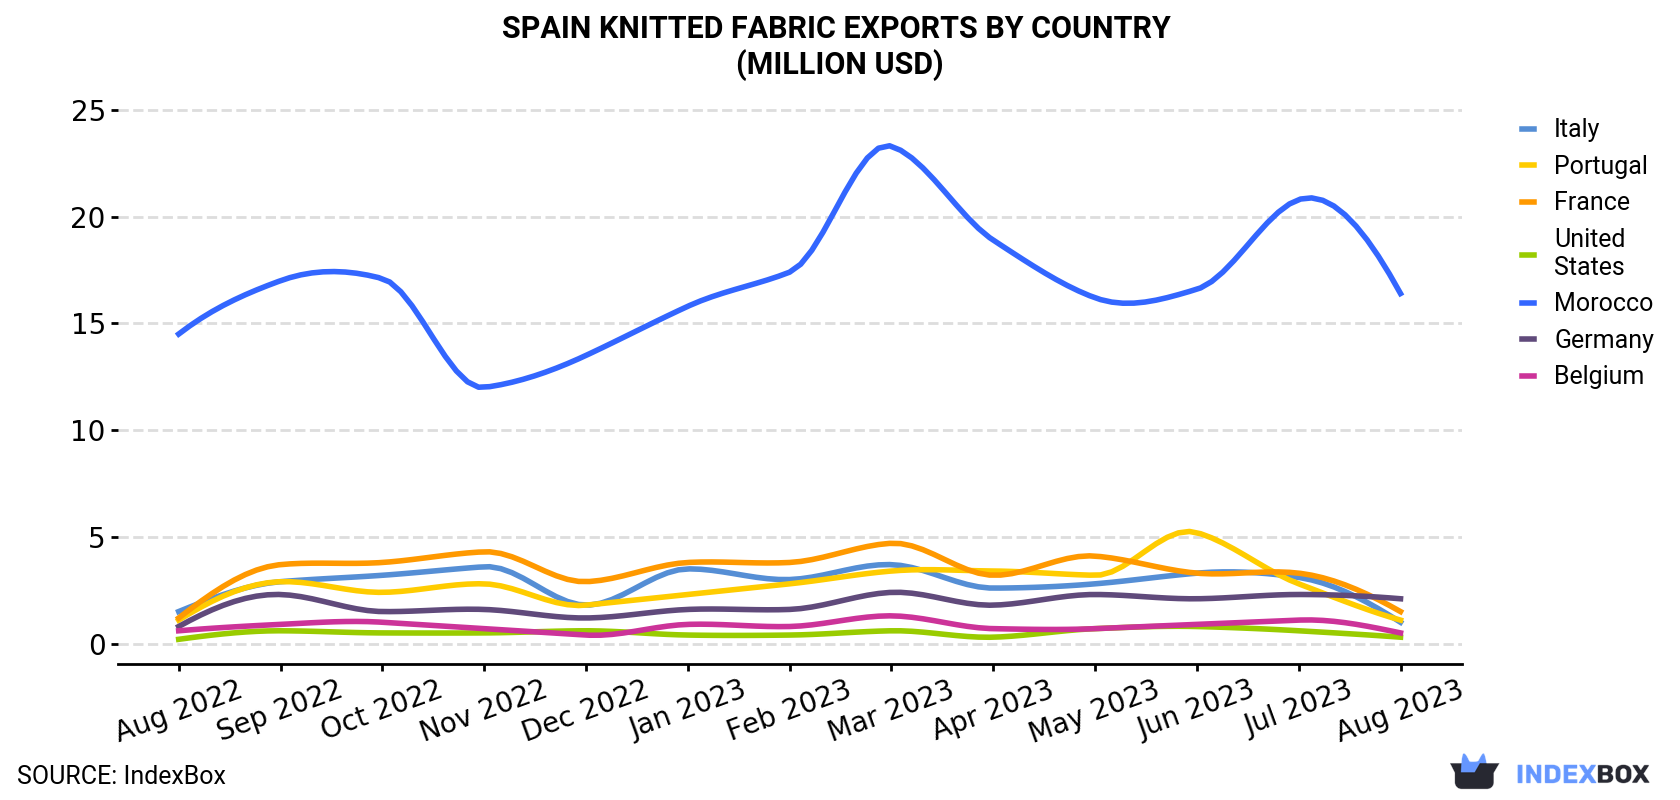 Spain Knitted Fabric Exports By Country (Million USD)